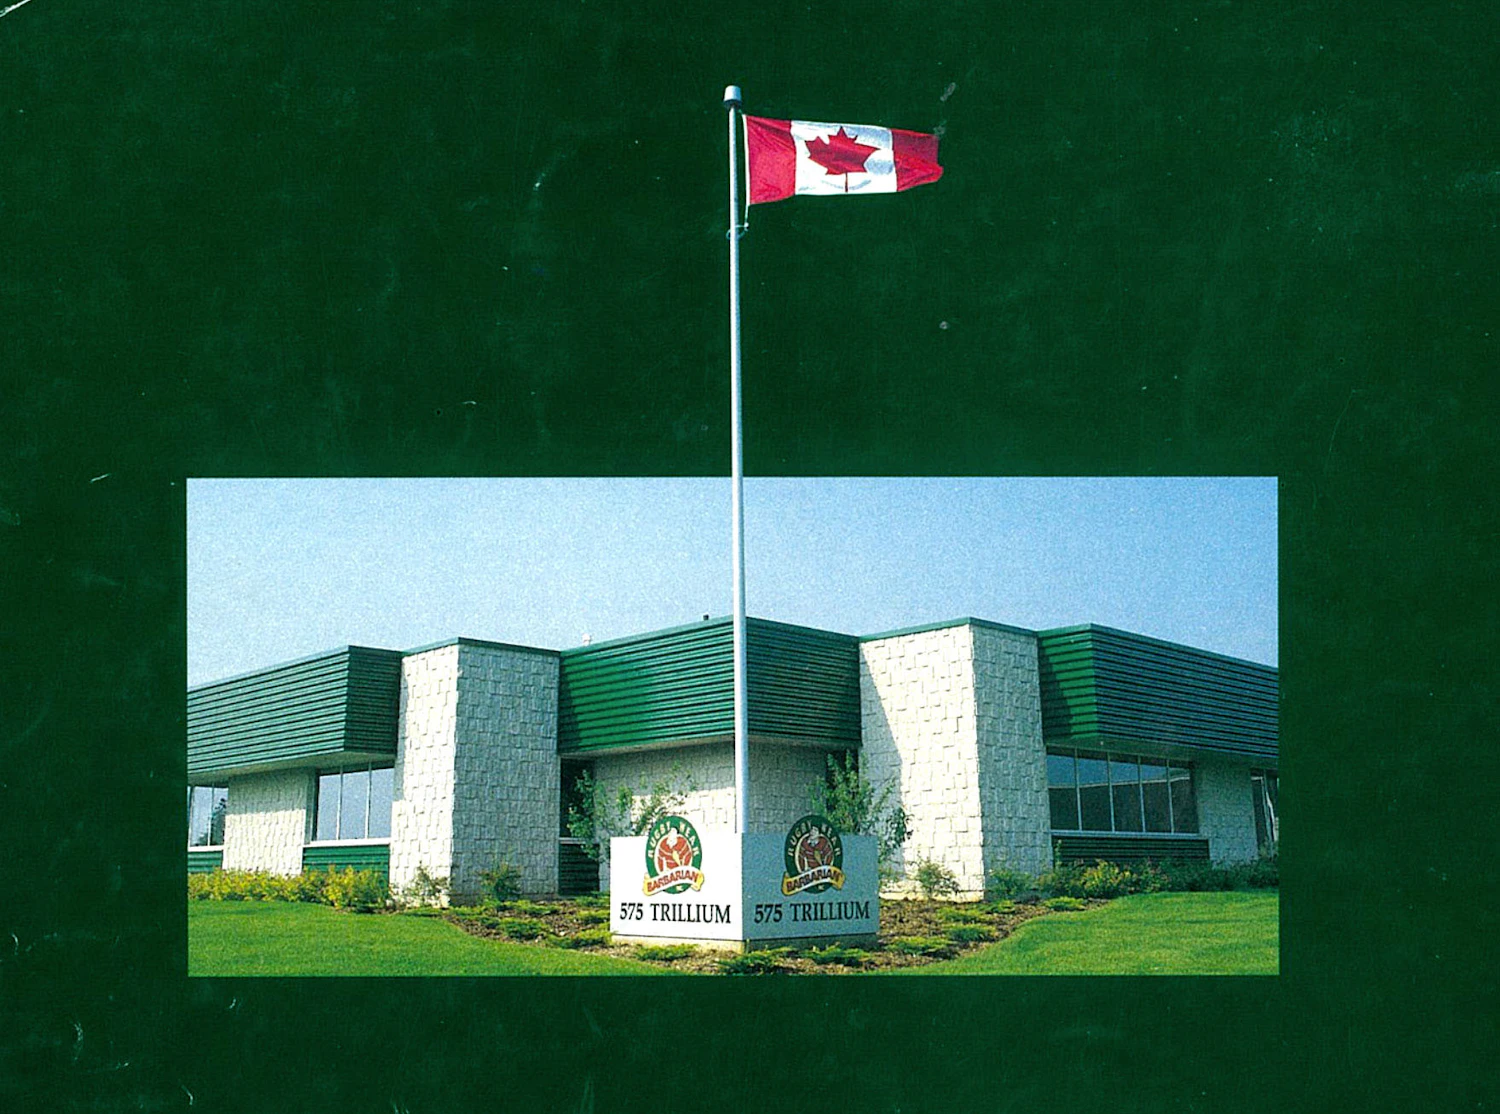 The BARBARIAN headquarters with a sign reading 575TRILLIUM, from the 1992 catalog